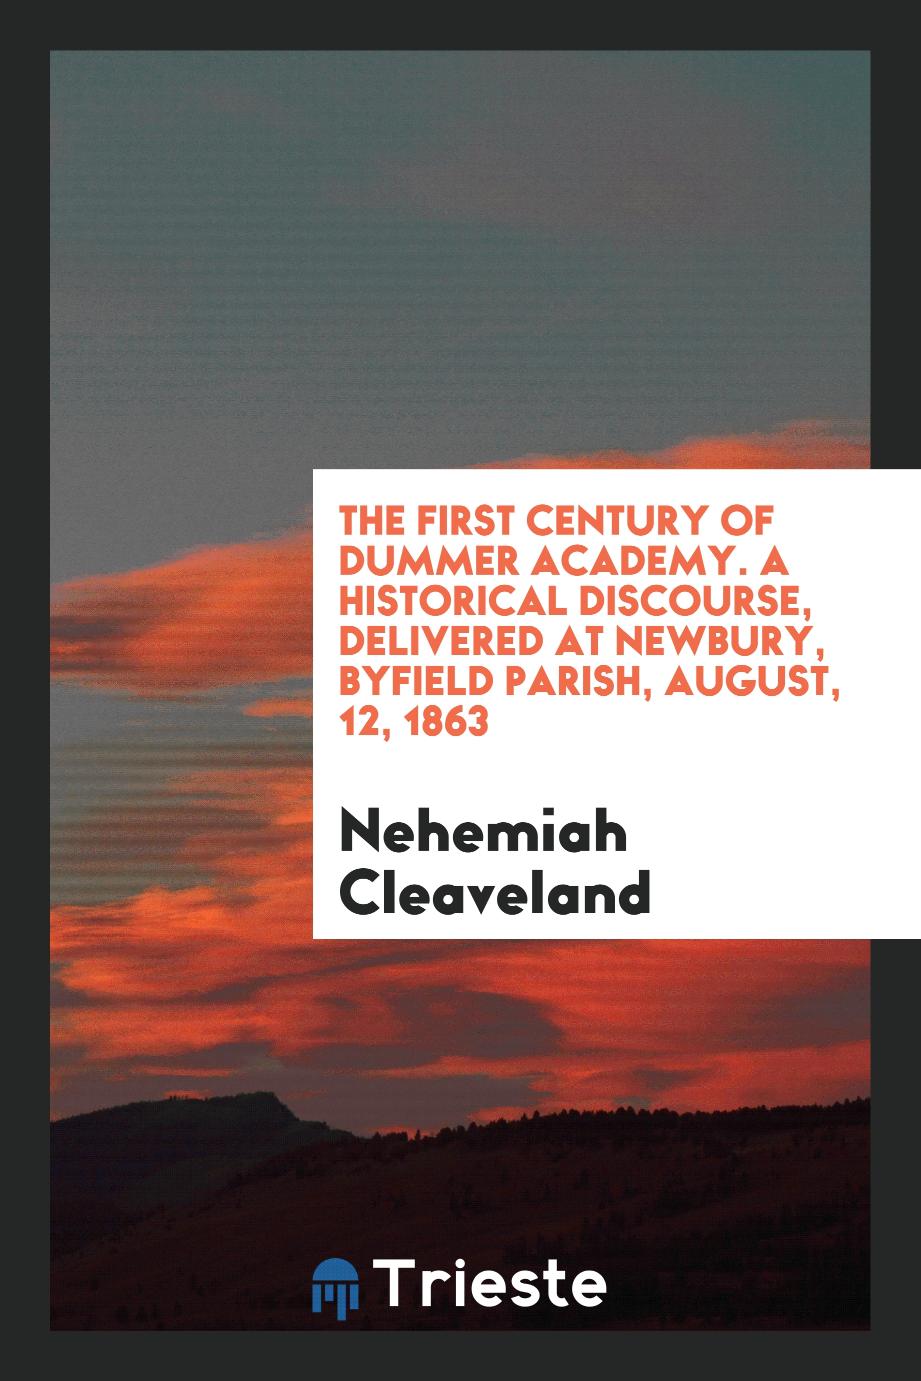 The First Century of Dummer Academy. A Historical Discourse, Delivered at Newbury, Byfield Parish, August, 12, 1863